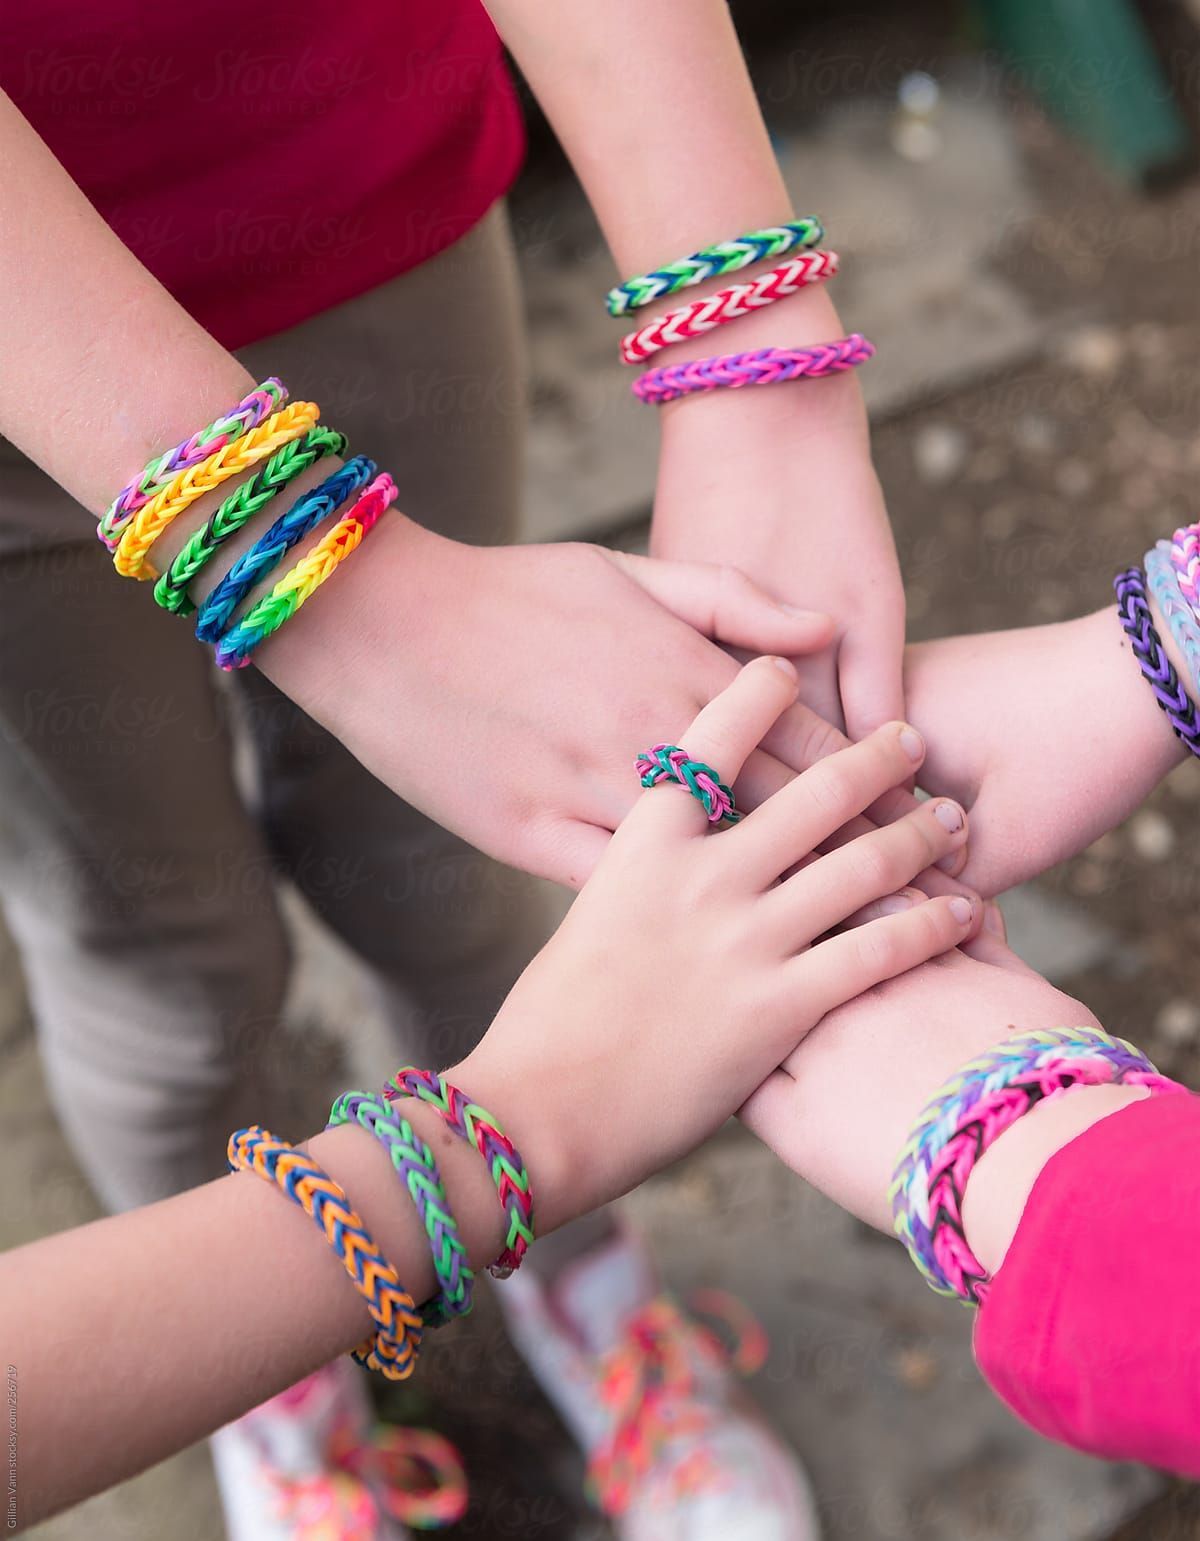 girls wrists adorned with colourful bracelets made from rubber bands. Best friend bracelets, Friend bracelets, Friends forever picture